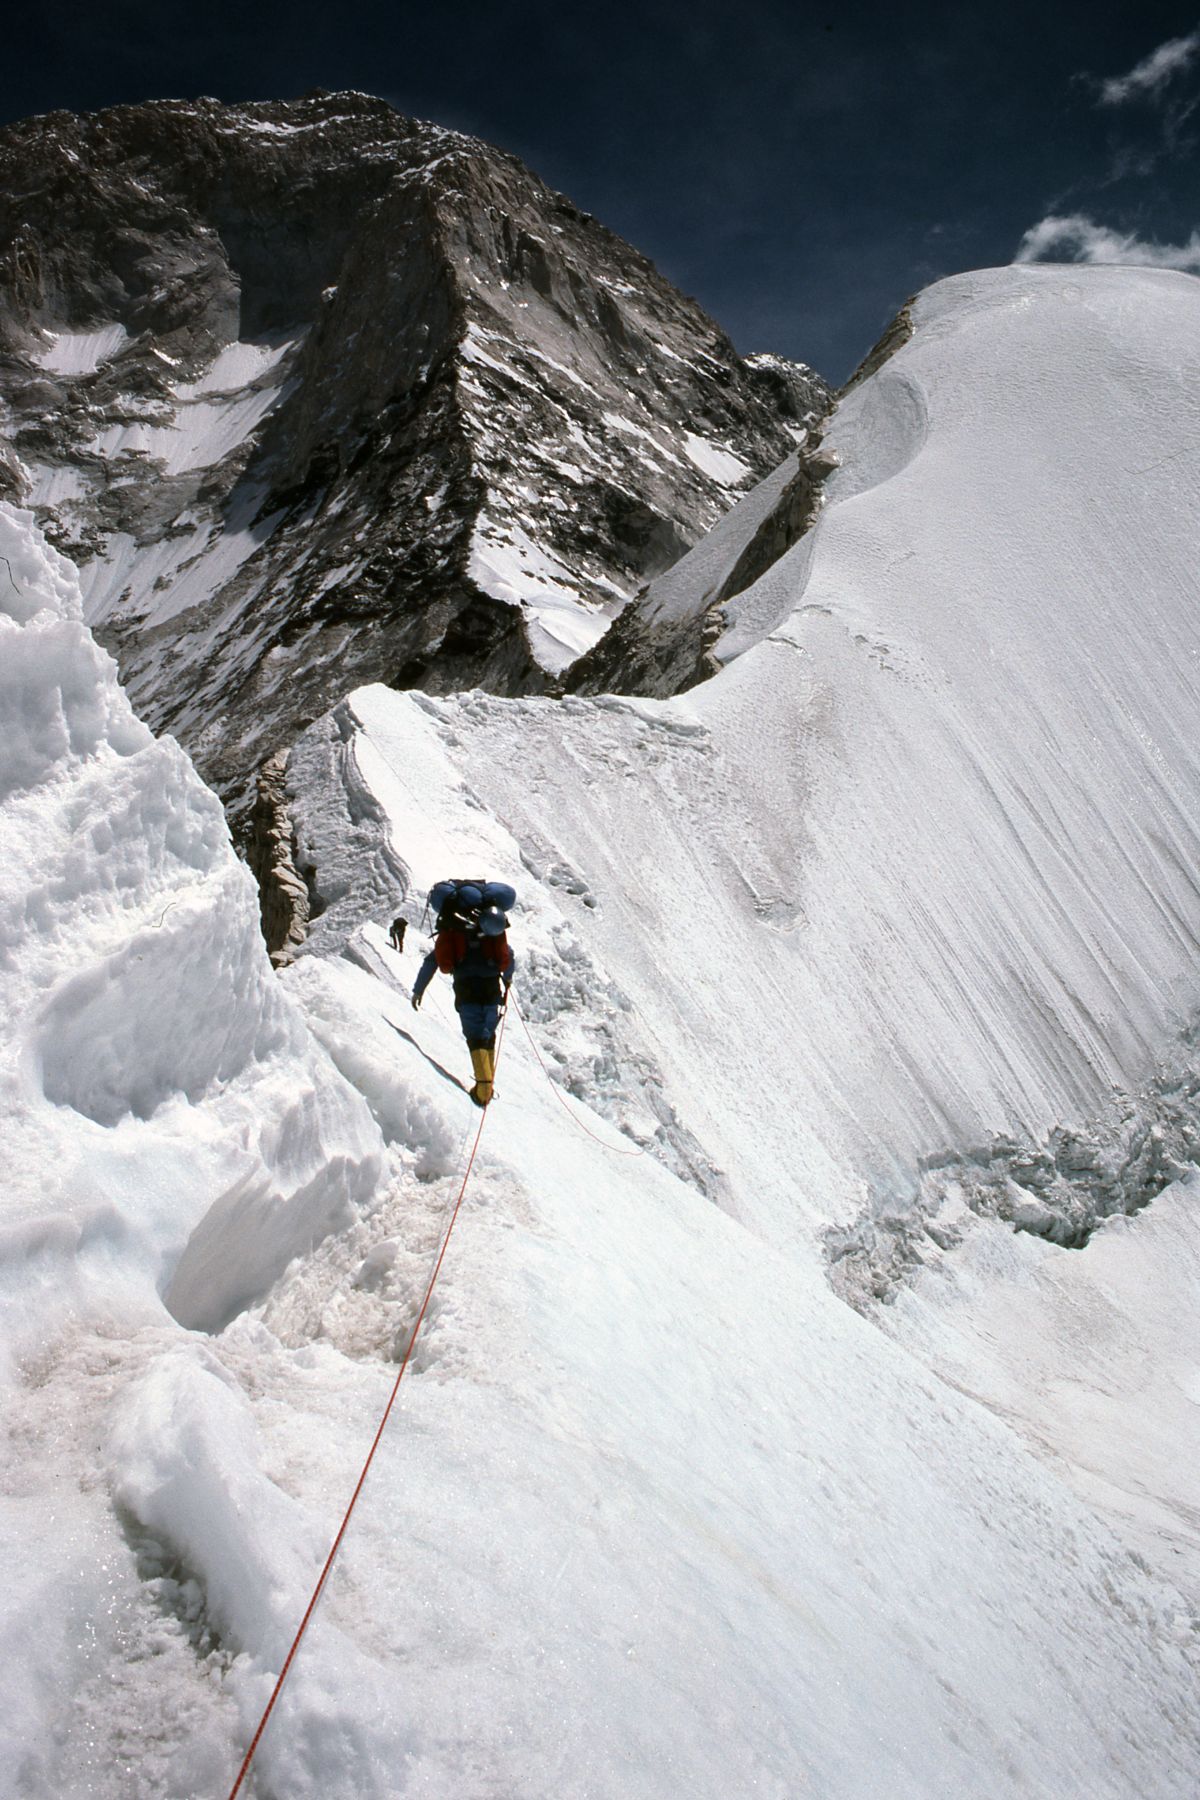 Chris Kopczynski and John Roskelley led an all-Spokane climbing expedition to the world’s fifth-highest peak, Makalu, on the border of Nepal and China, in 1980. The west buttress is seen in this photo. (Courtesy of Chris Kopczynski)